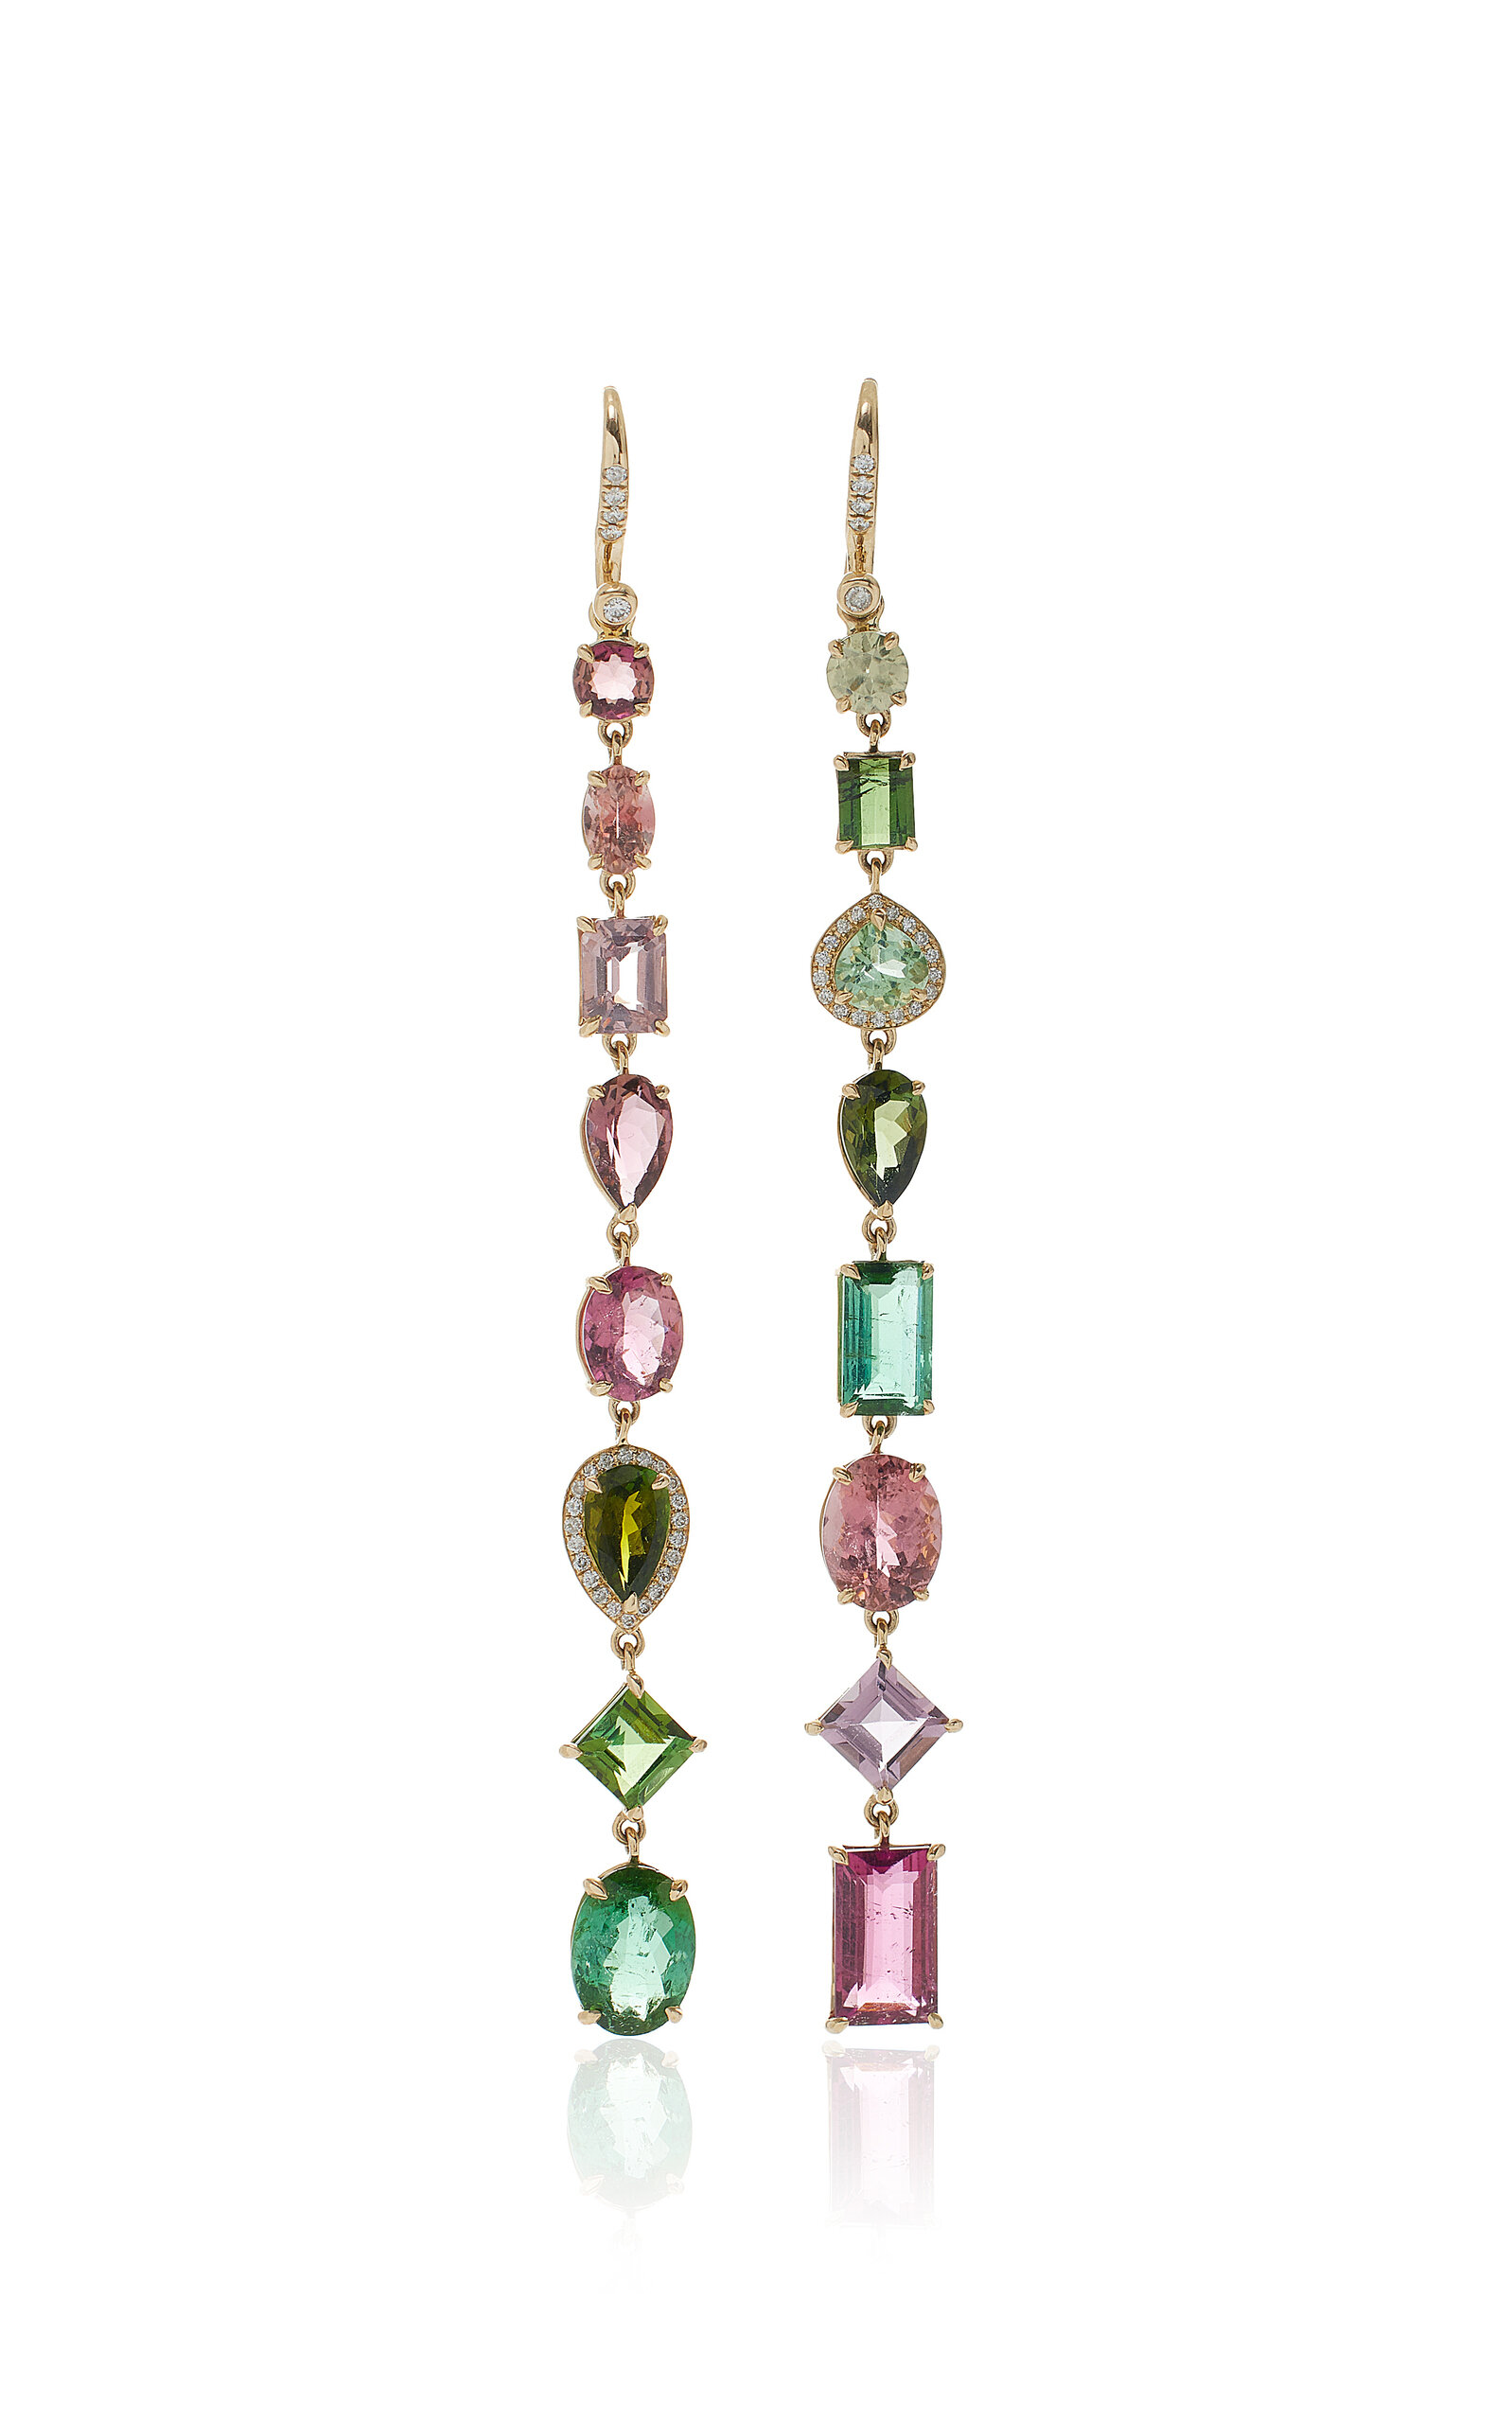 One-of-a-Kind 14K Yellow Gold Tourmaline Earrings